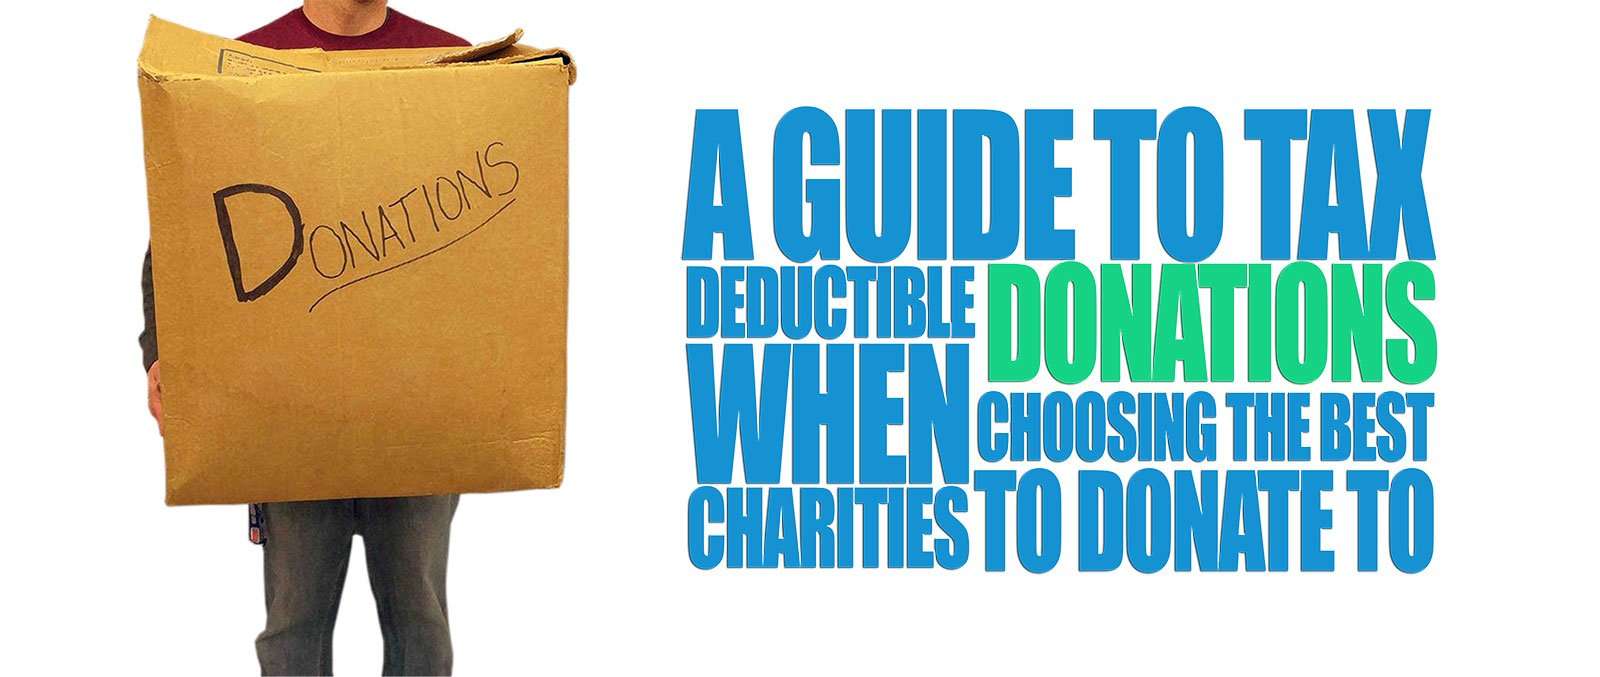 A Guide To Tax Deductible donations &  best charities to ...